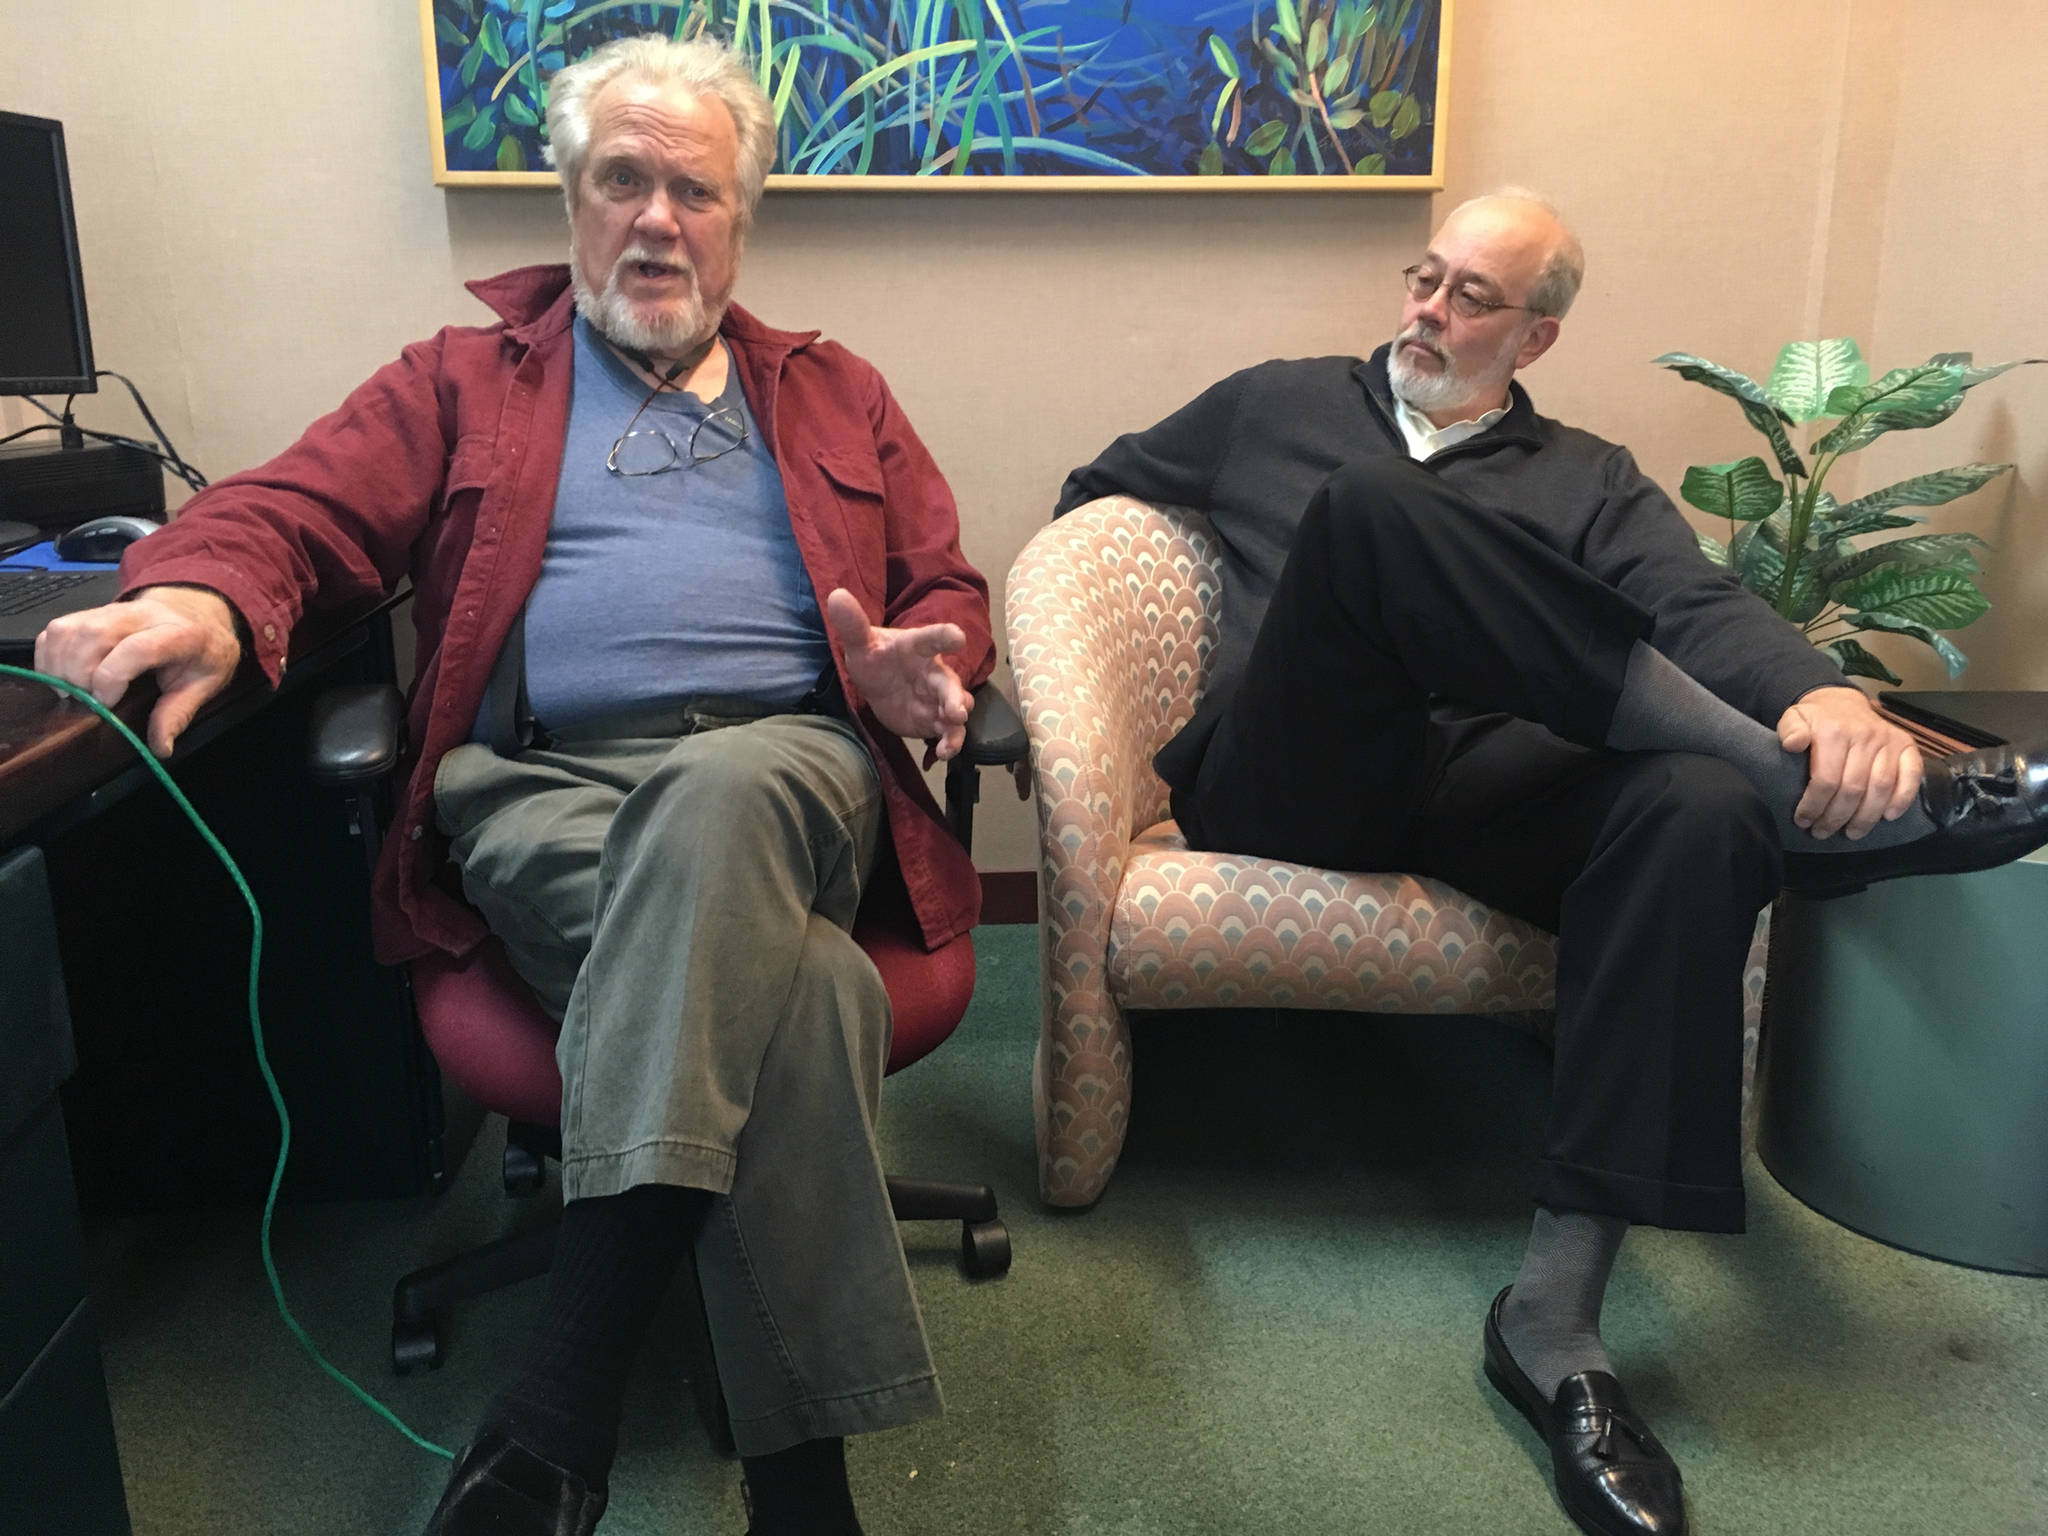 Eric Forrer, left, and Joe Geldhof, right, have sued the State of Alaska in an attempt to stop a plan that calls for borrowing up to $1 billion from global bond markets to pay oil and gas tax credits owed by the state. They are pictured May 22, 2018 in an interview at the Juneau Empire. (James Brooks | Juneau Empire)